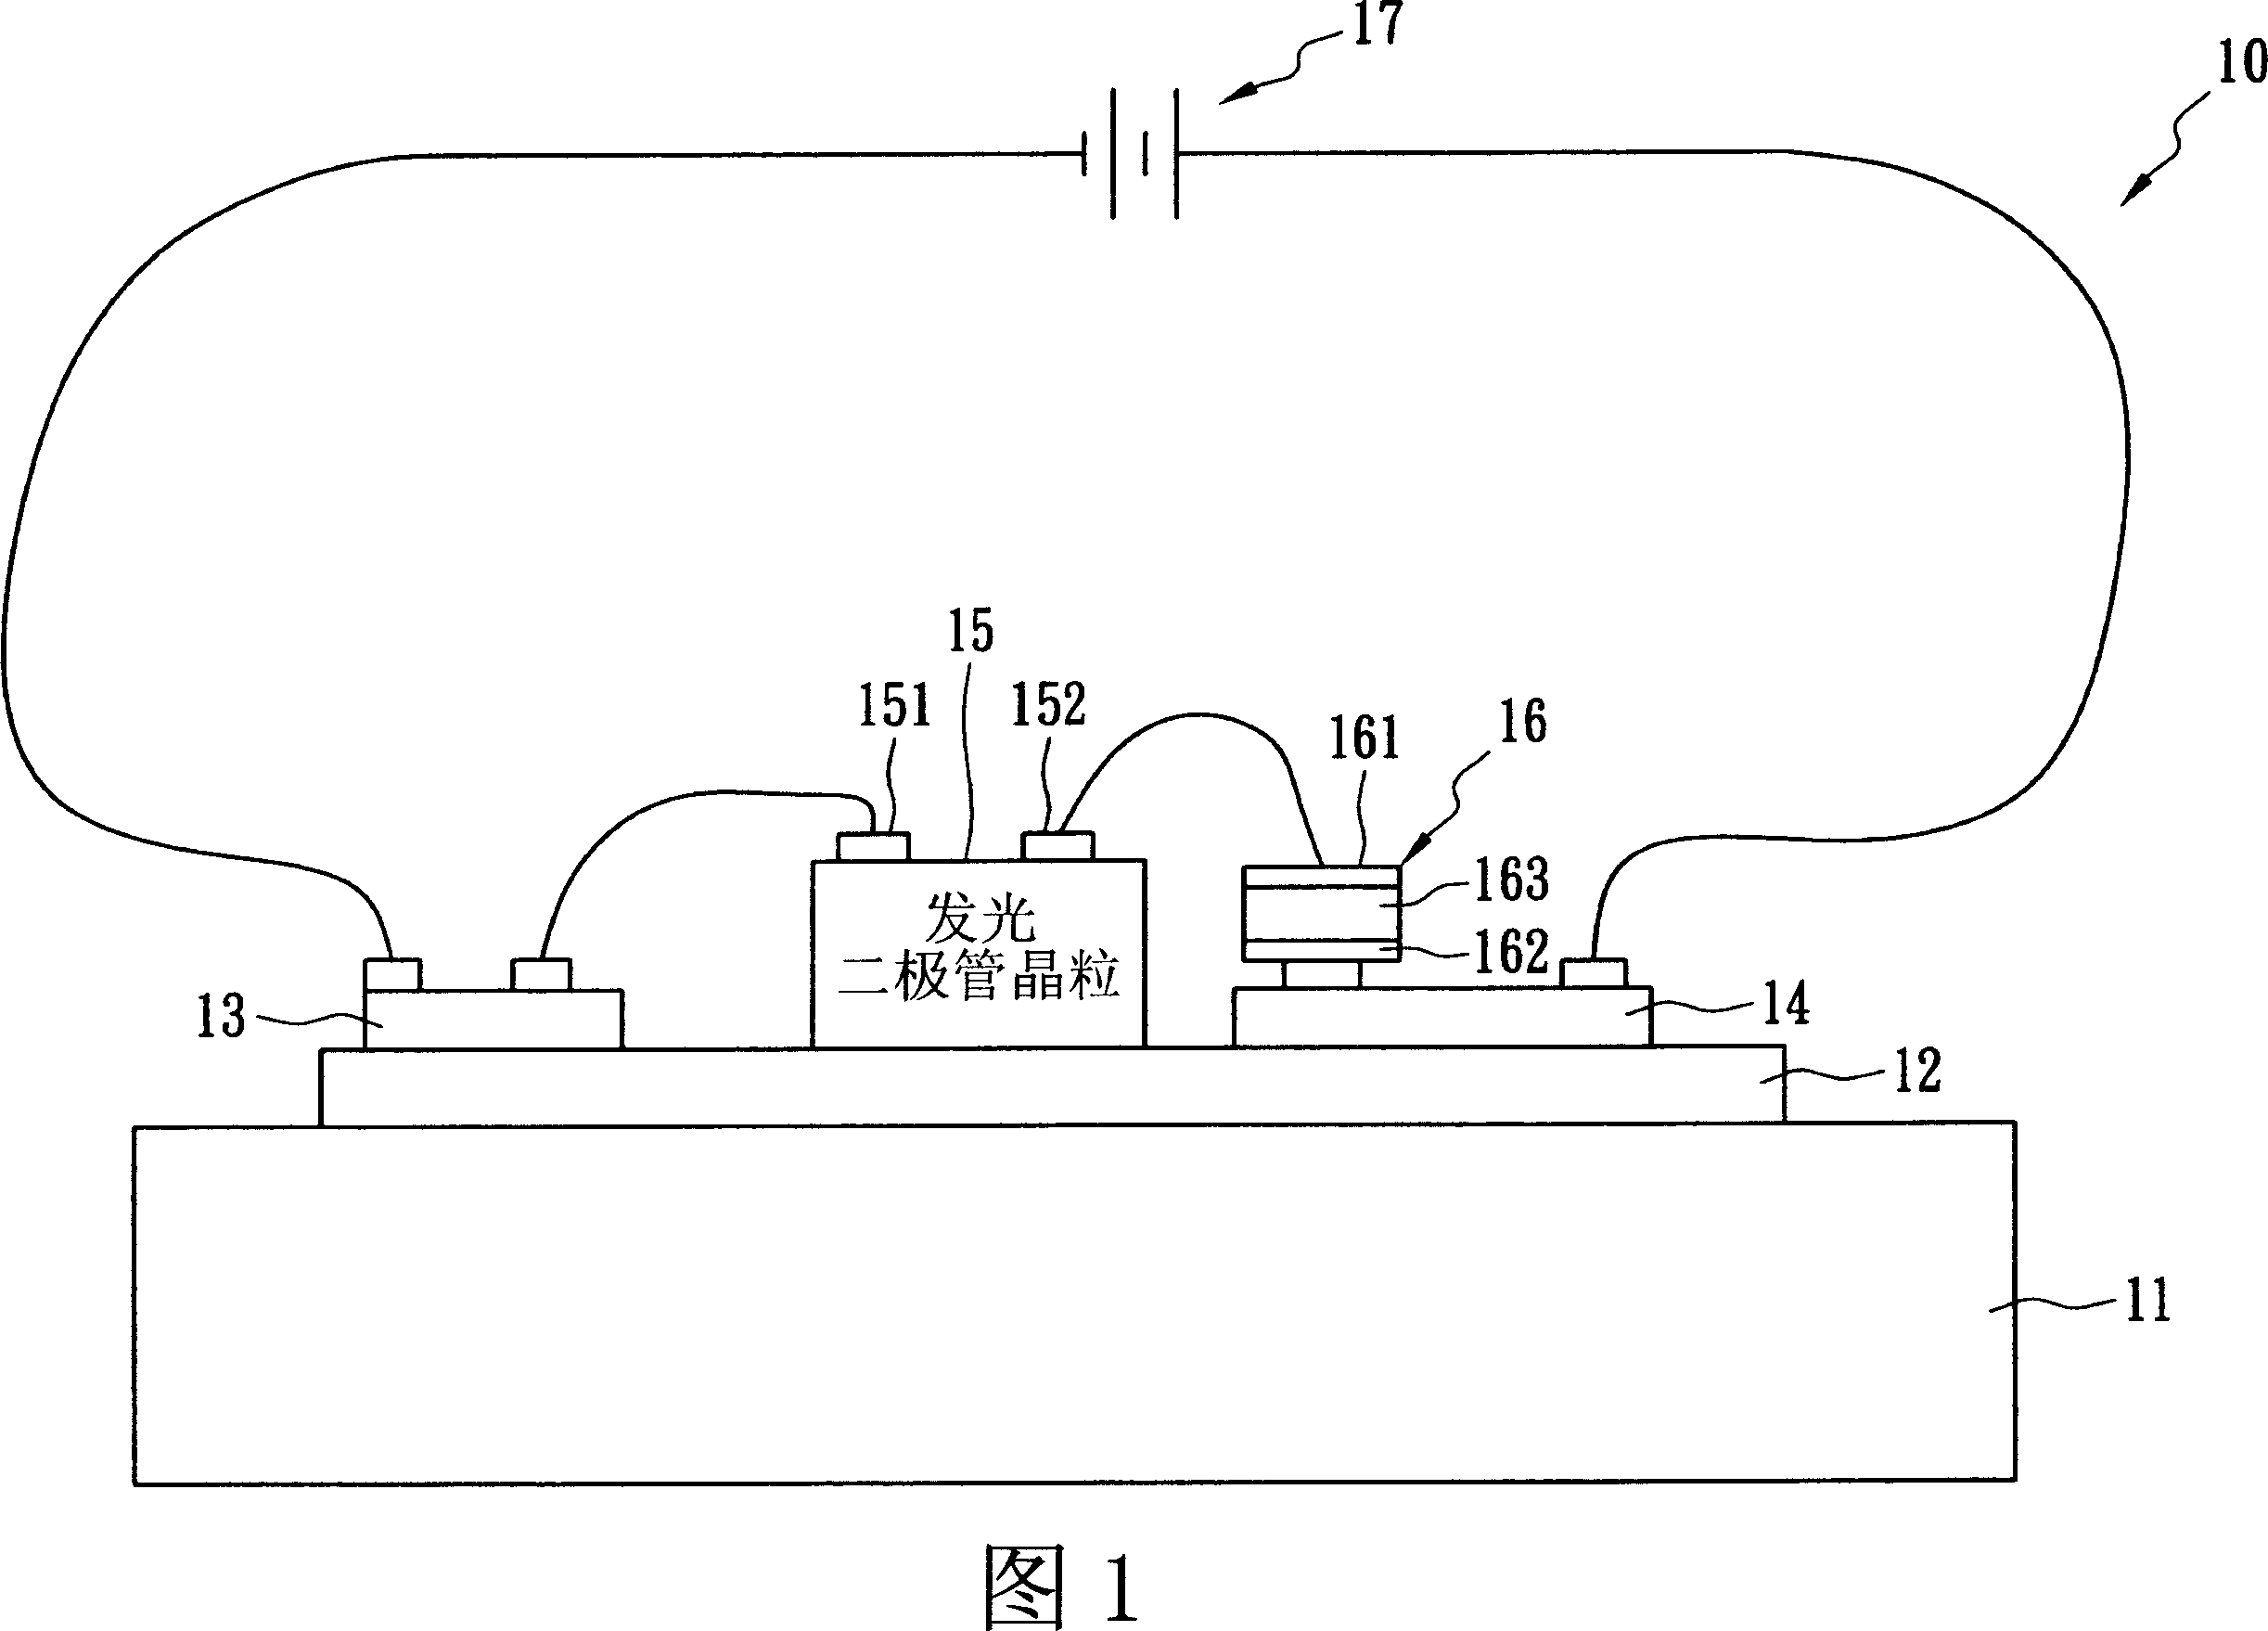 LED device with temp. control function